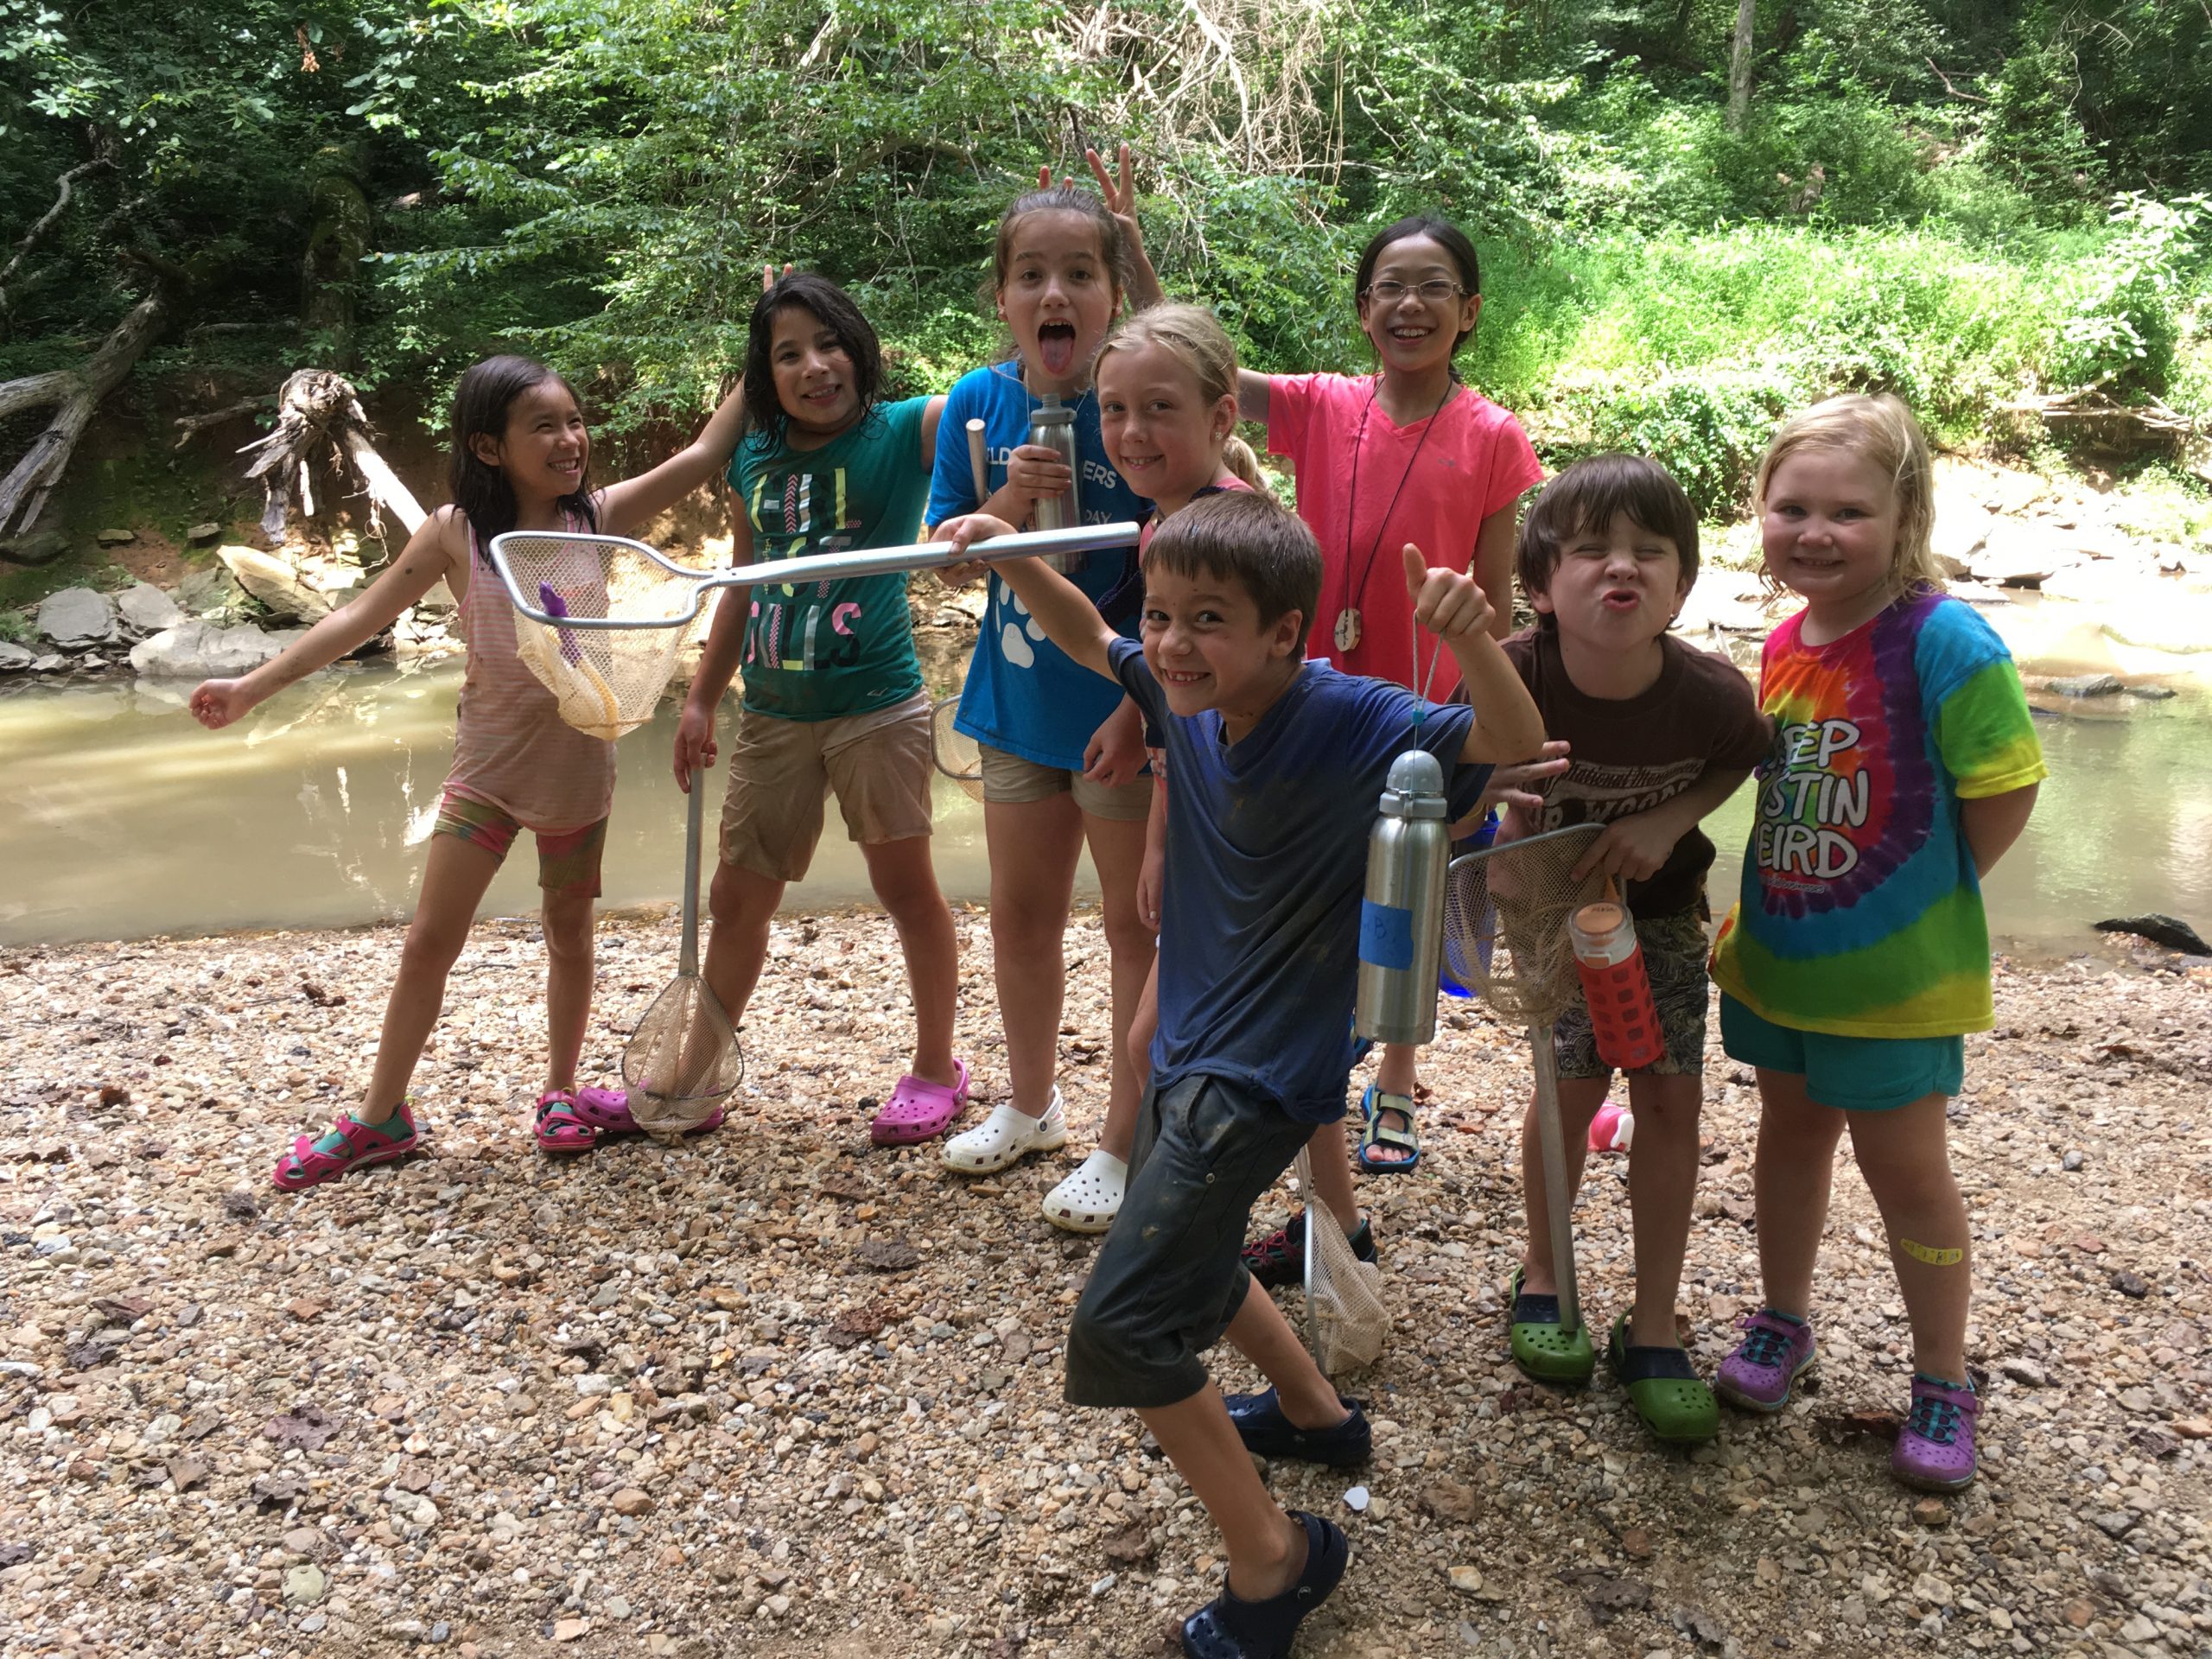 Kids enrolled in summer camp at Locust Grove Nature Center.